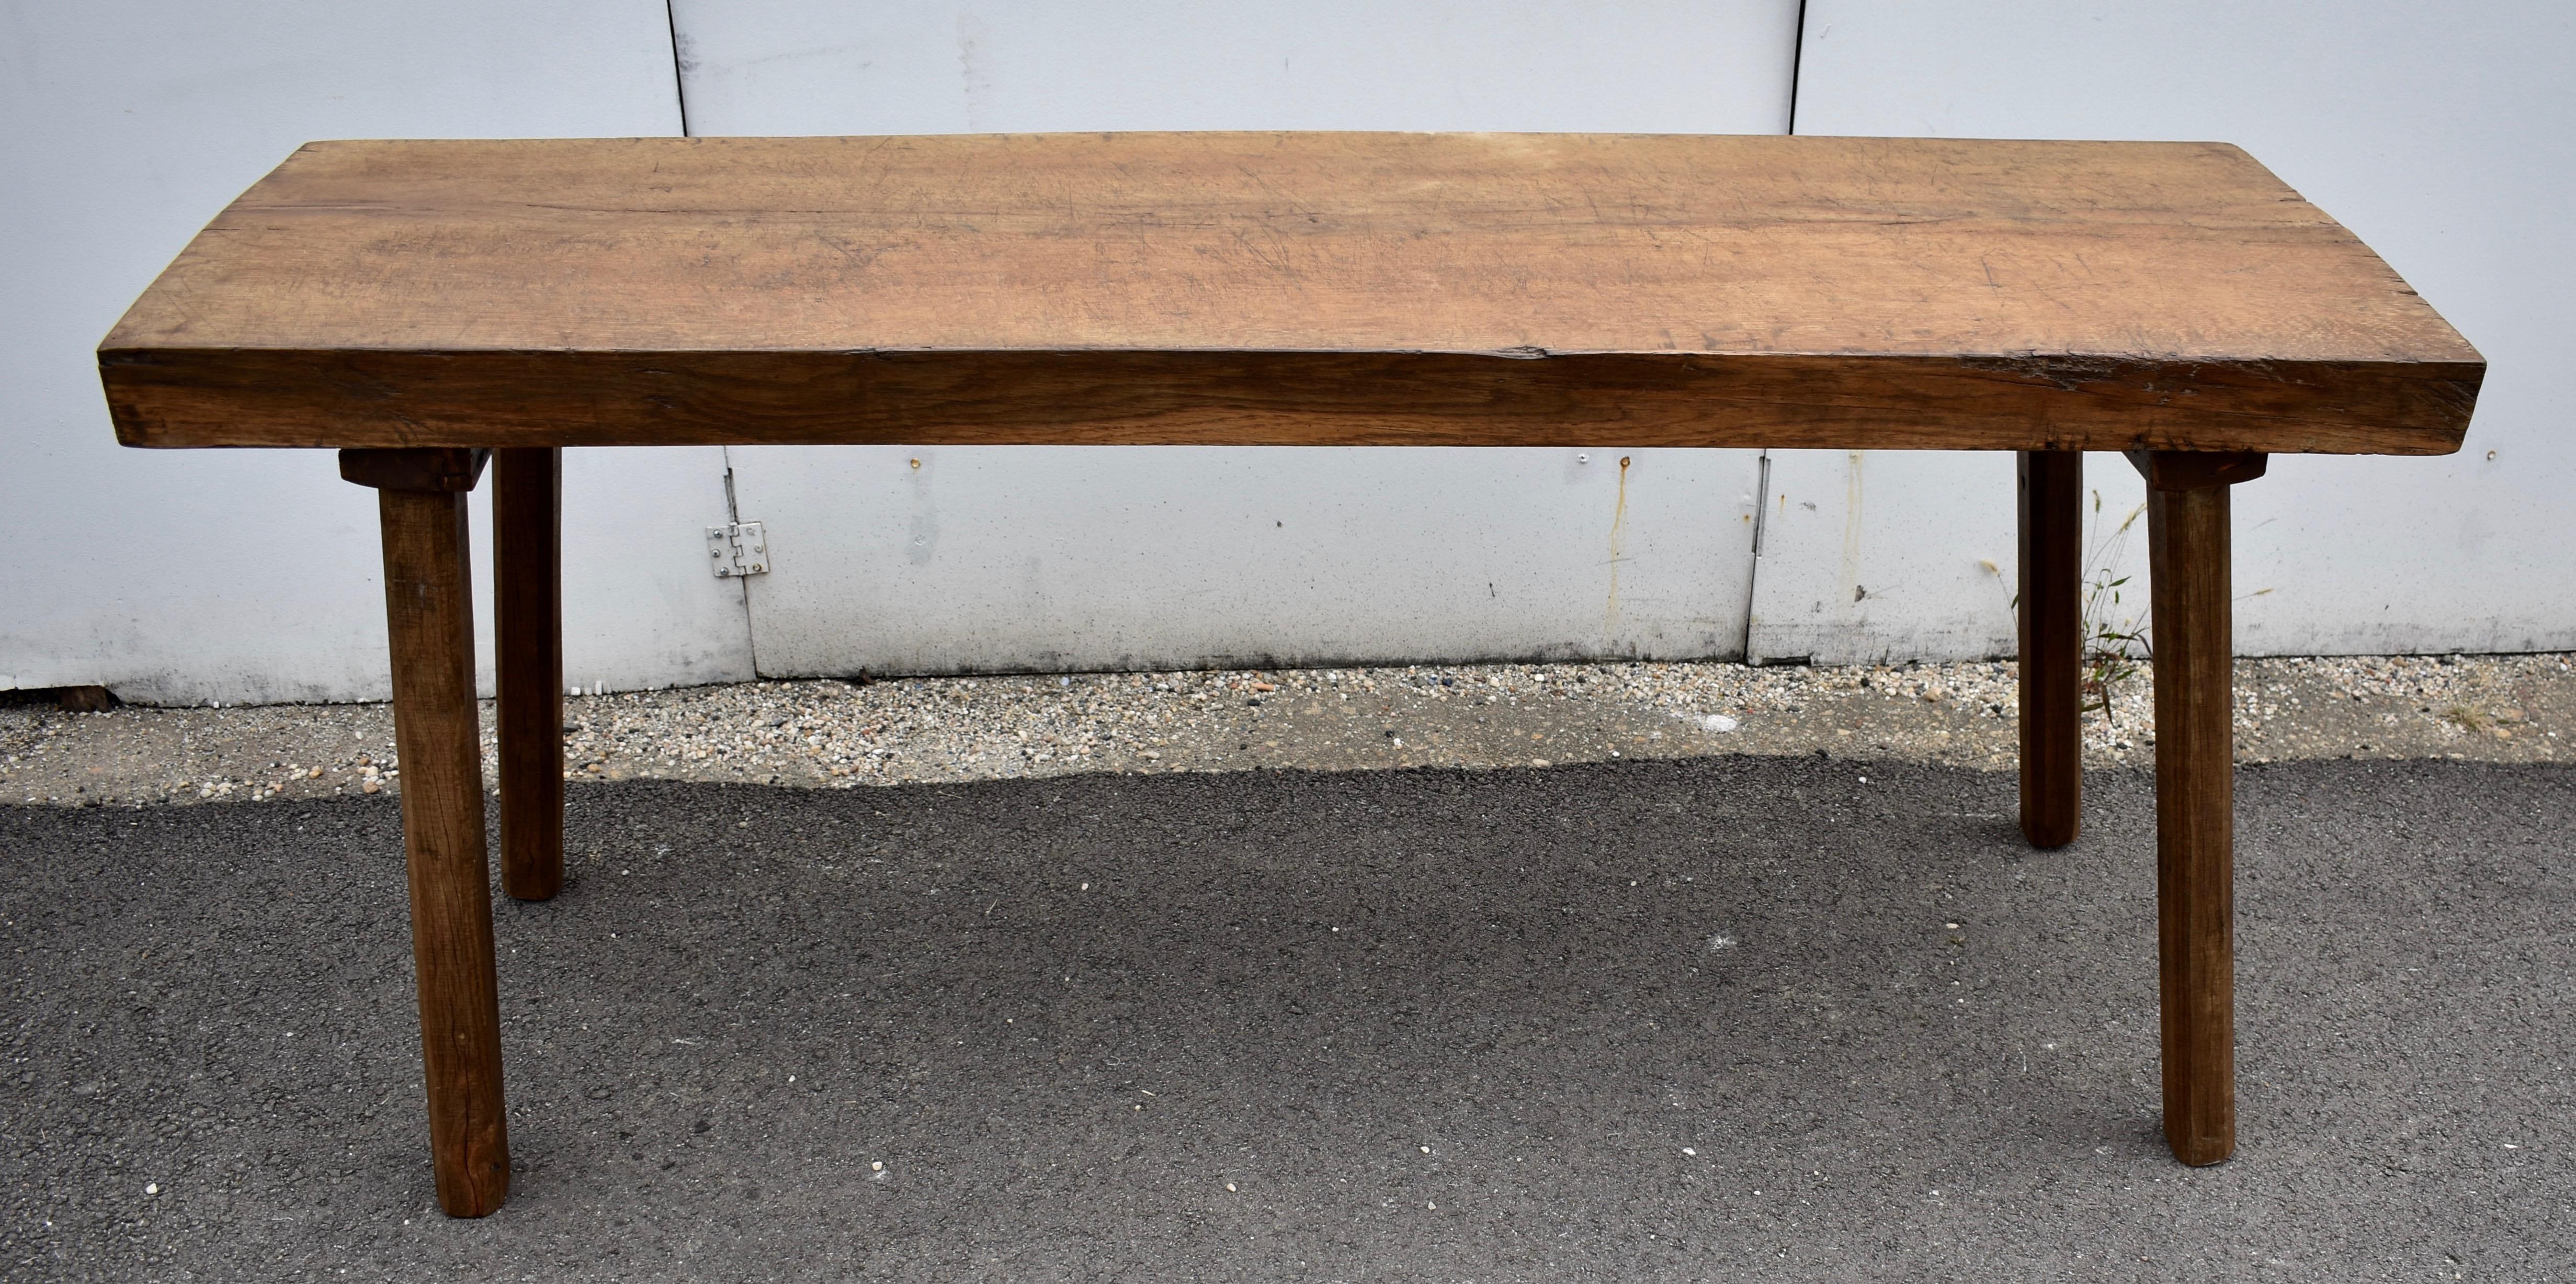 This is an extremely heavy Pig Bench Table.  The top is a single slab of oak nearly six feet long and over three inches thick.  To resist splitting, both ends have heavy duty iron staples hammered deep into the end grain.  The big square legs are